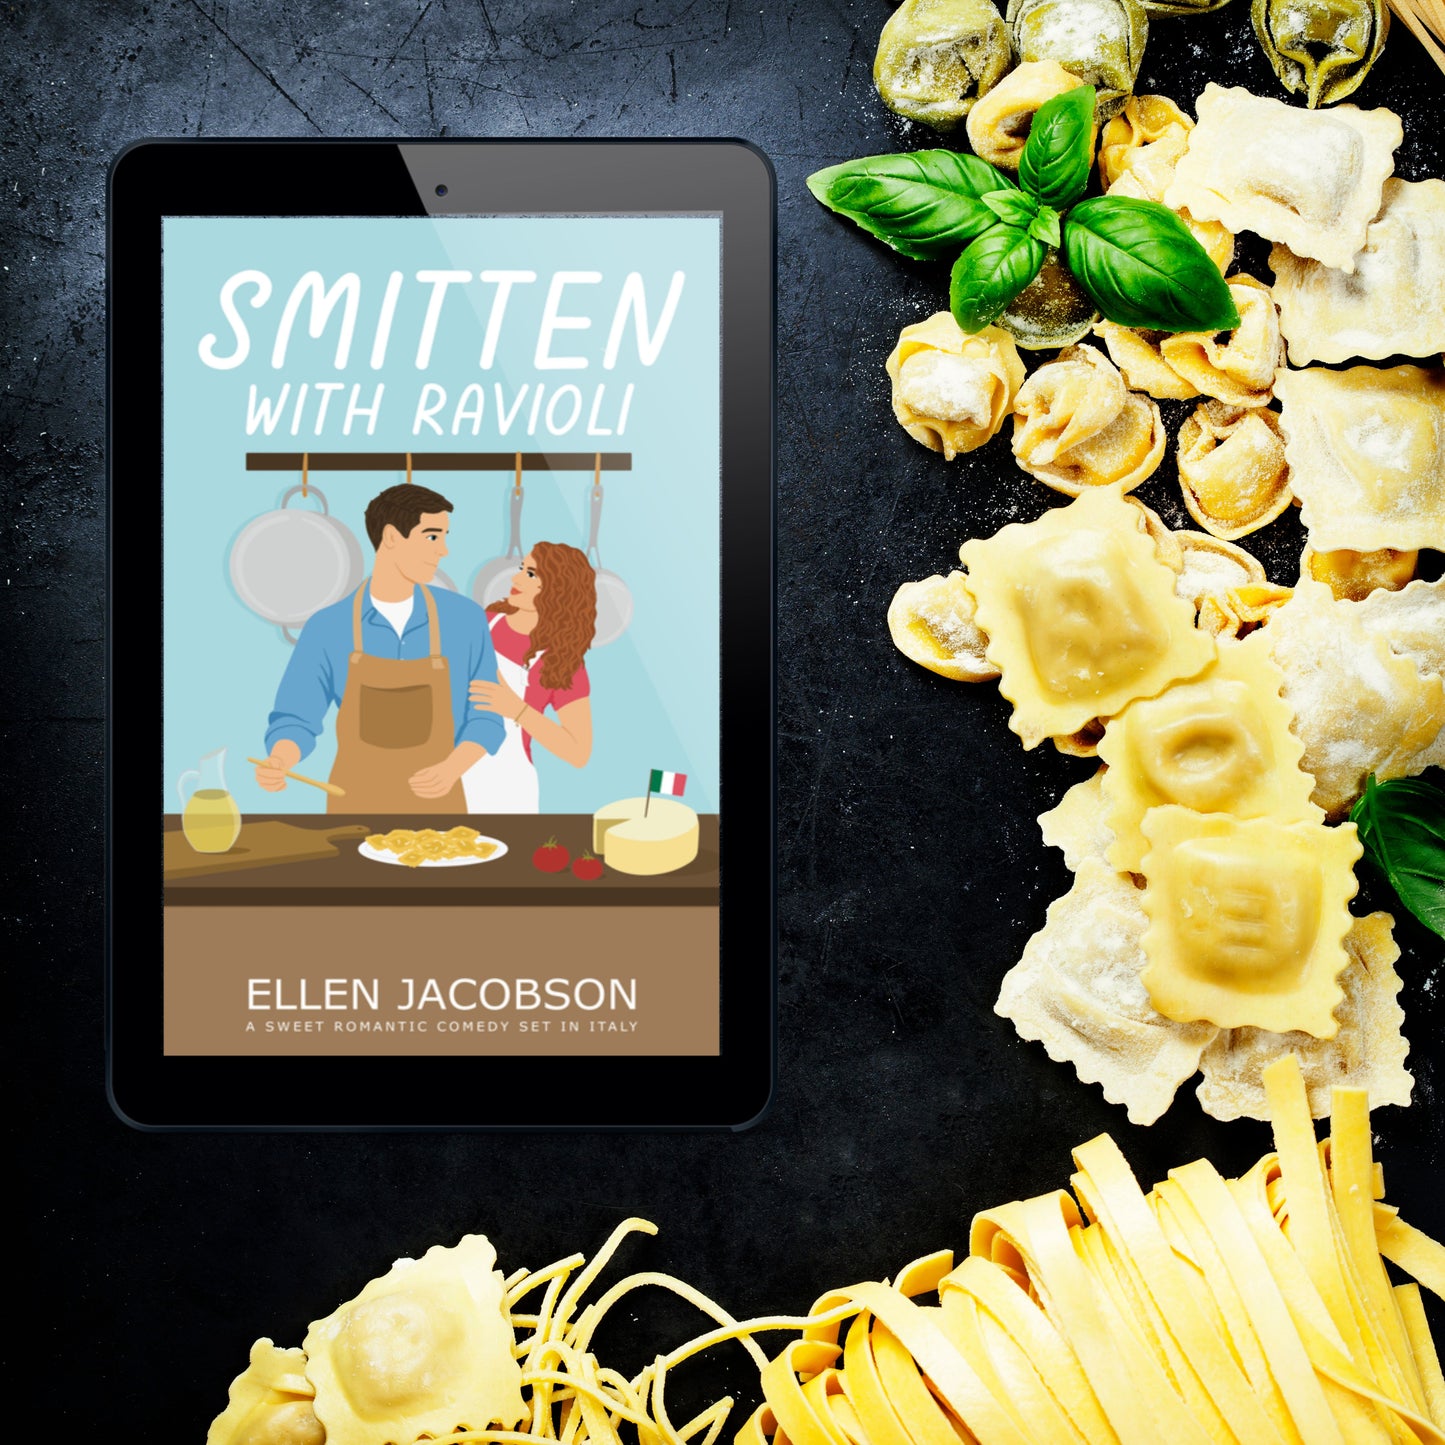 Smitten with Ravioli romantic comedy ebook cover against background with pasta